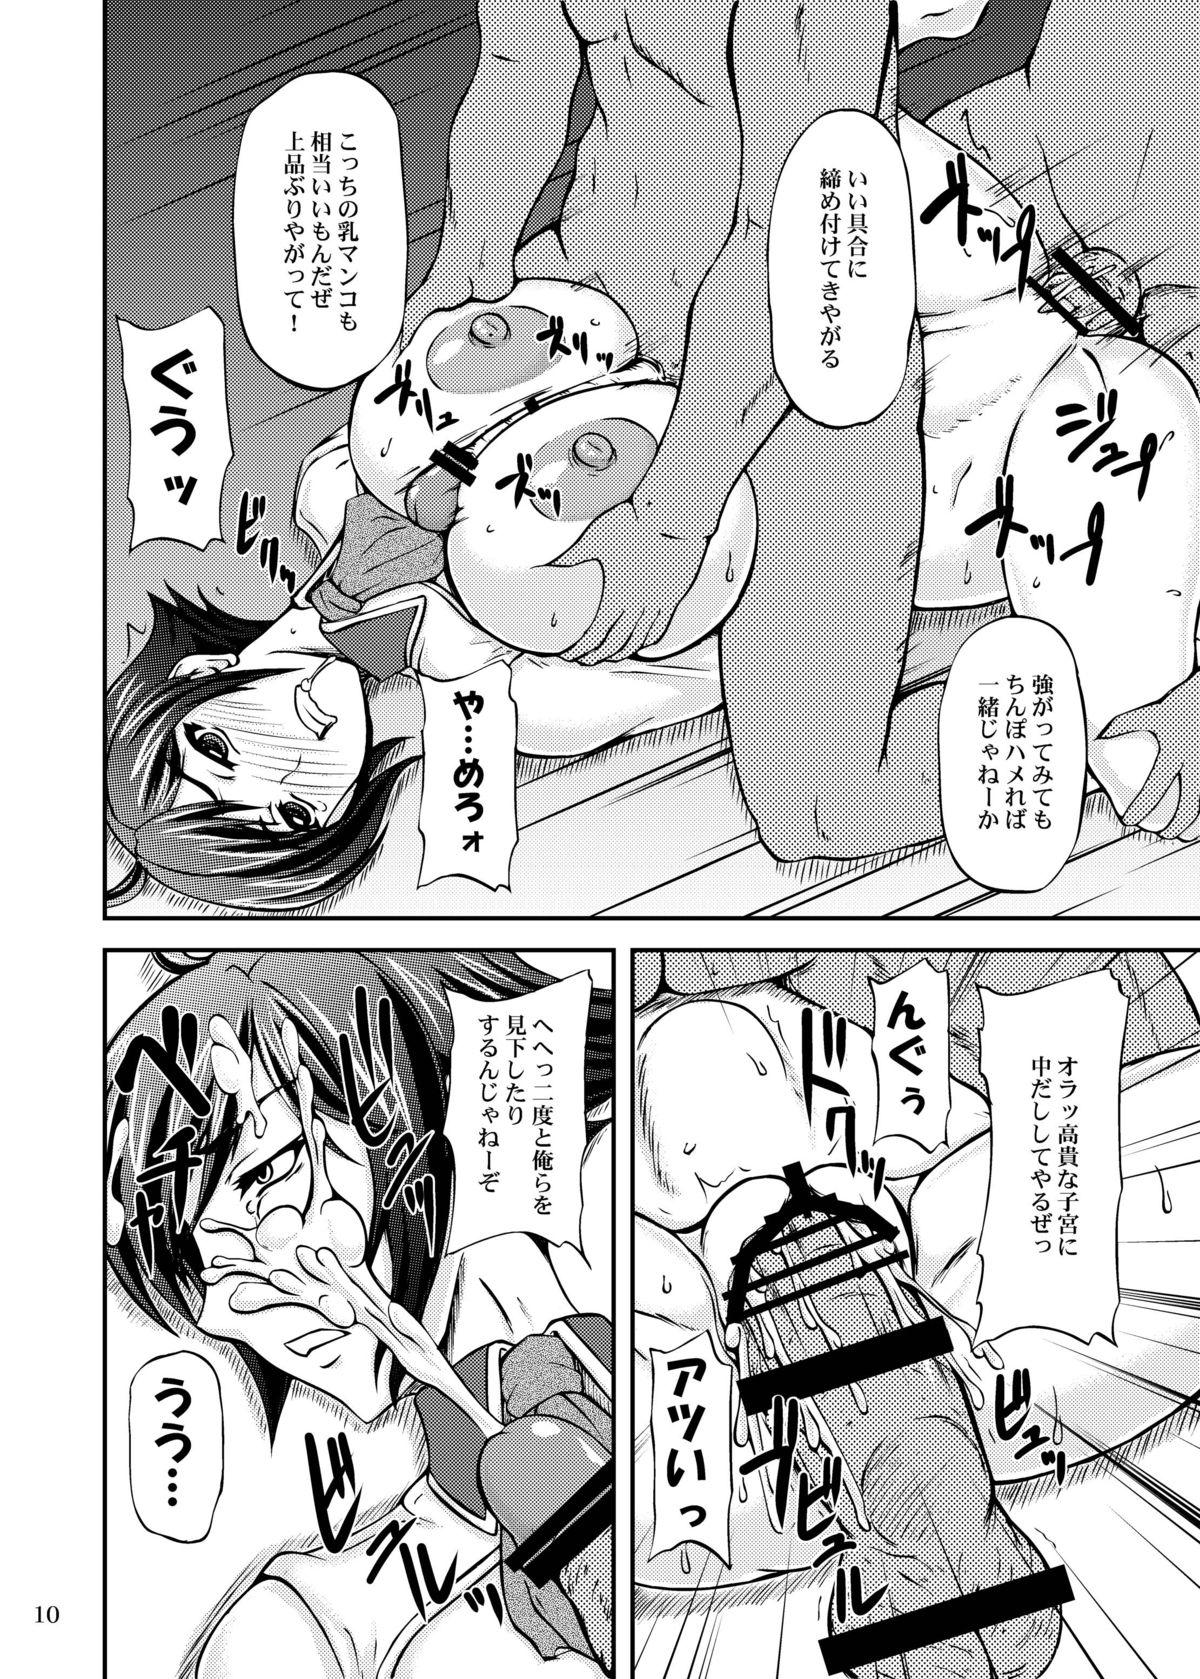 Spy Camera Ikinari CLIMAX - King of fighters Sissy - Page 9